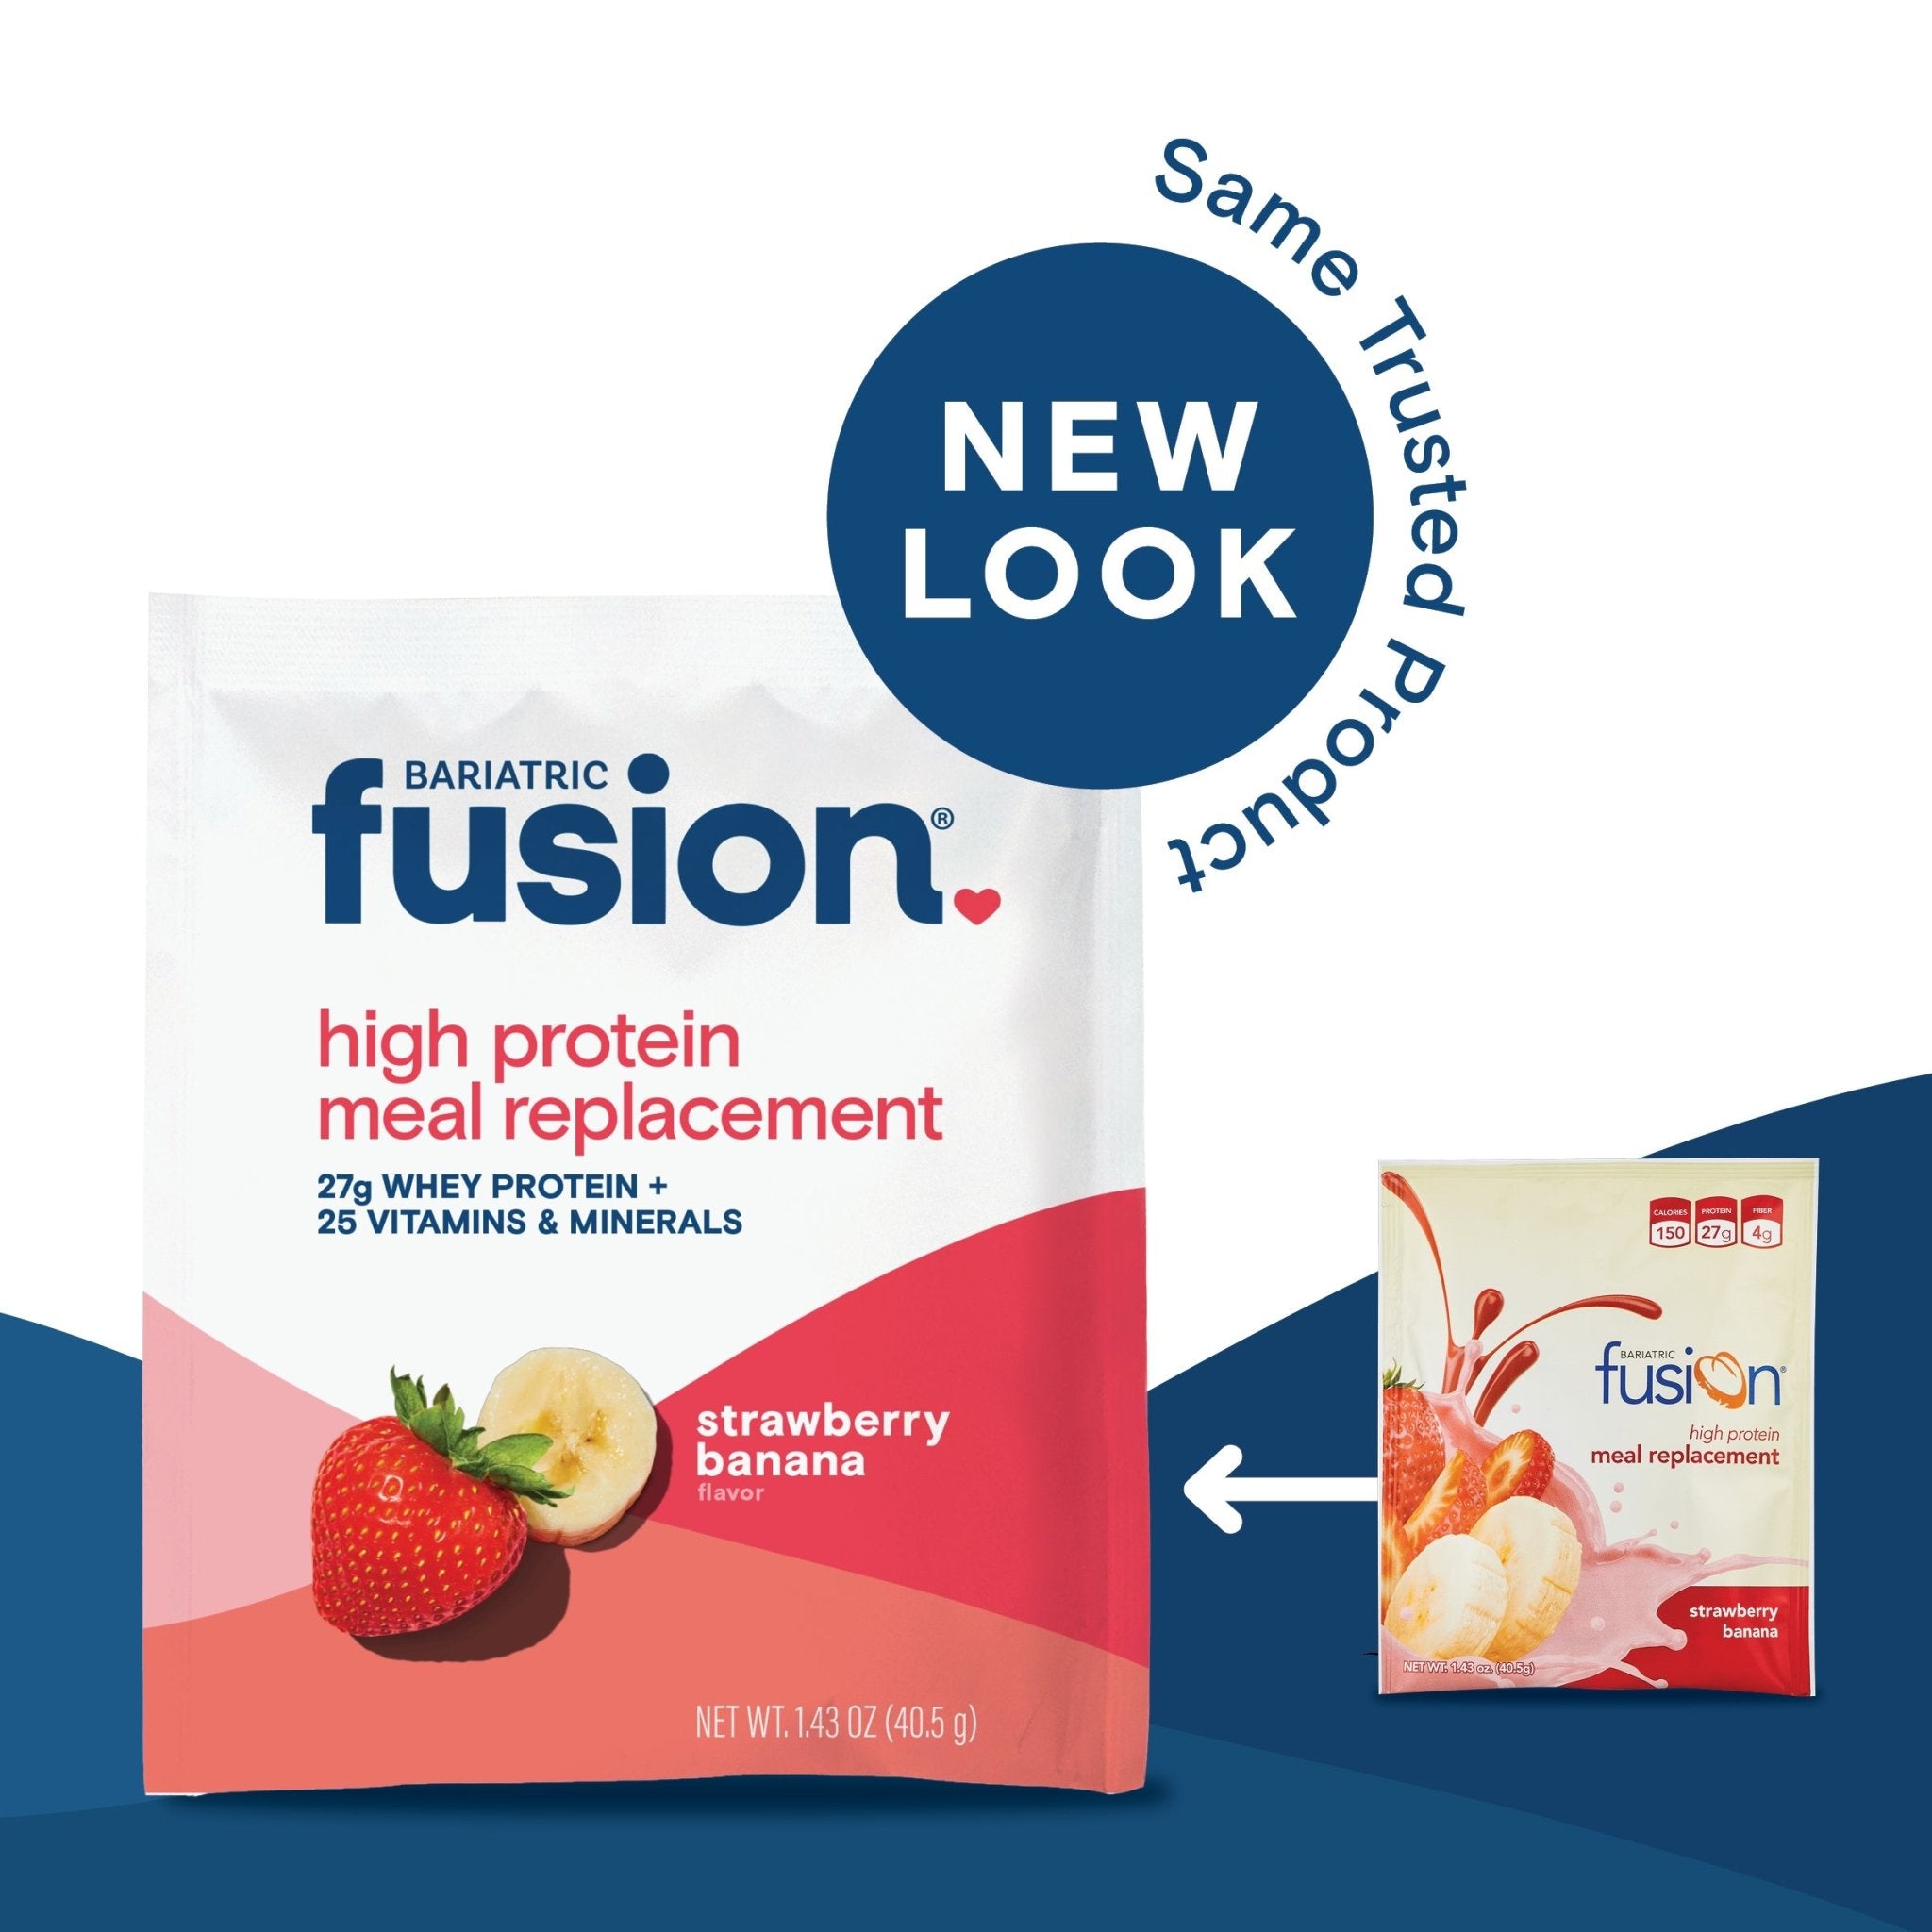 Bariatric Fusion Strawberry Banana High Protein Meal Replacement single serving new look, same trusted product.